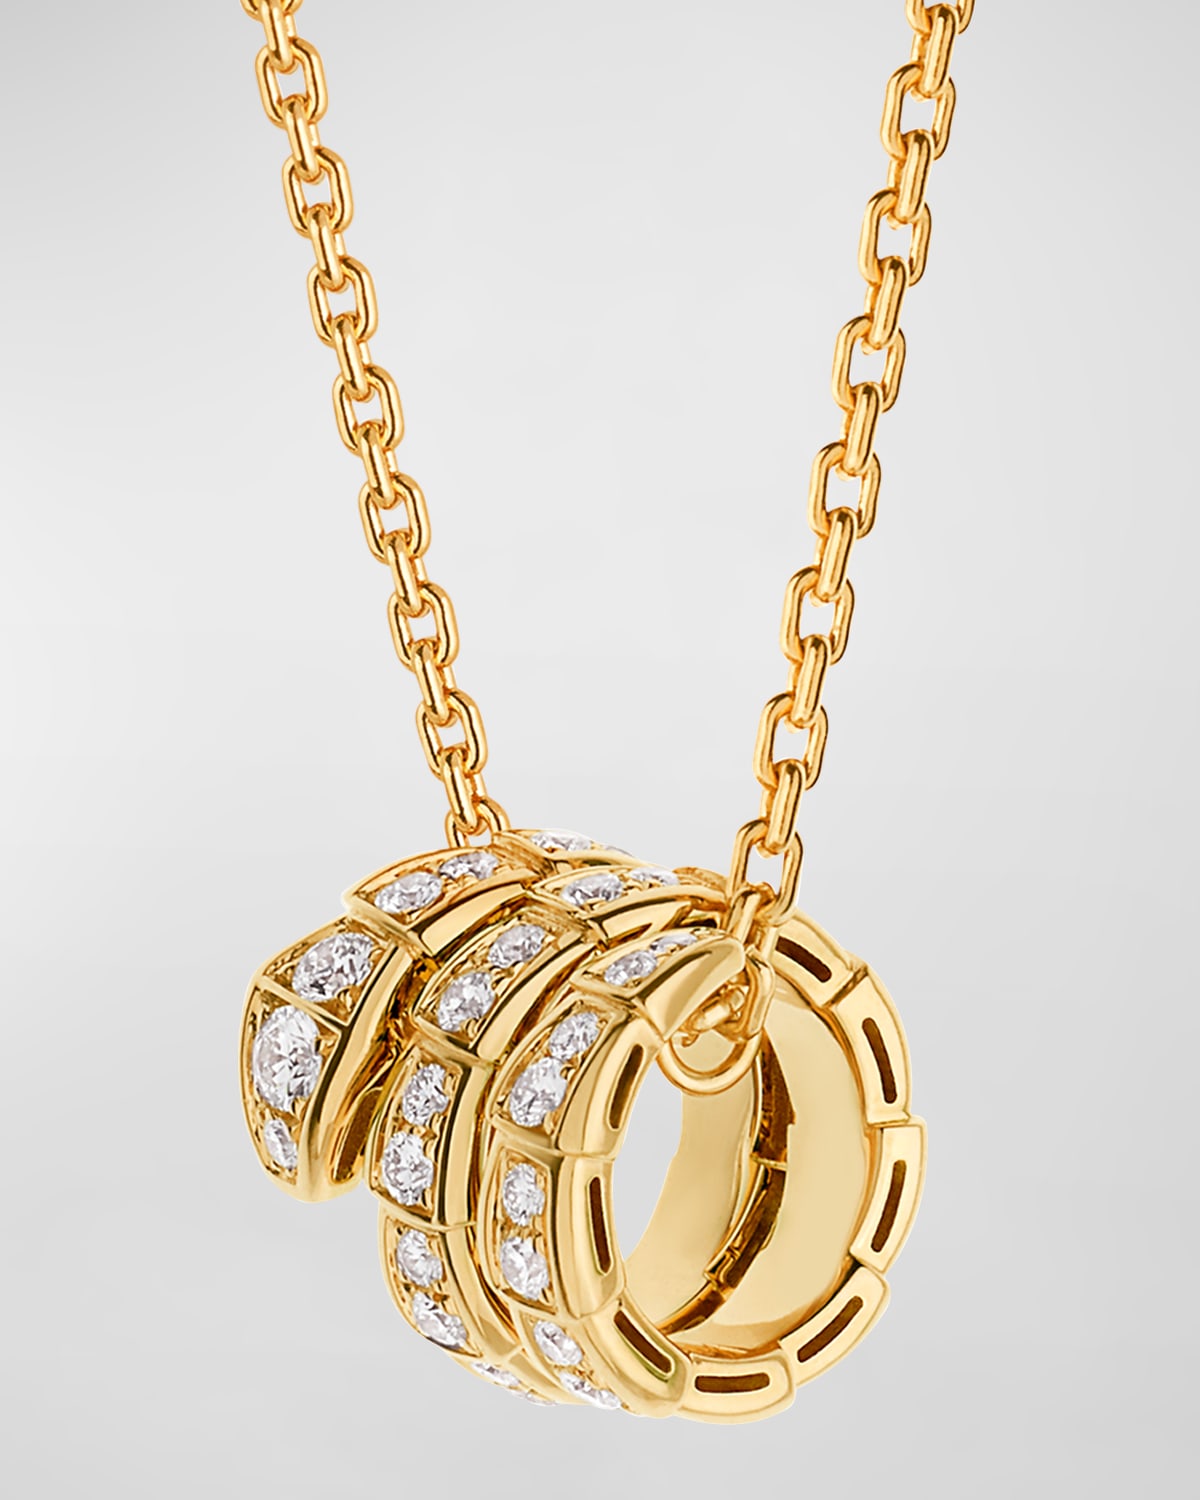 BVLGARI Serpenti Viper Necklace in 18k Yellow Gold with Full Diamond Pave